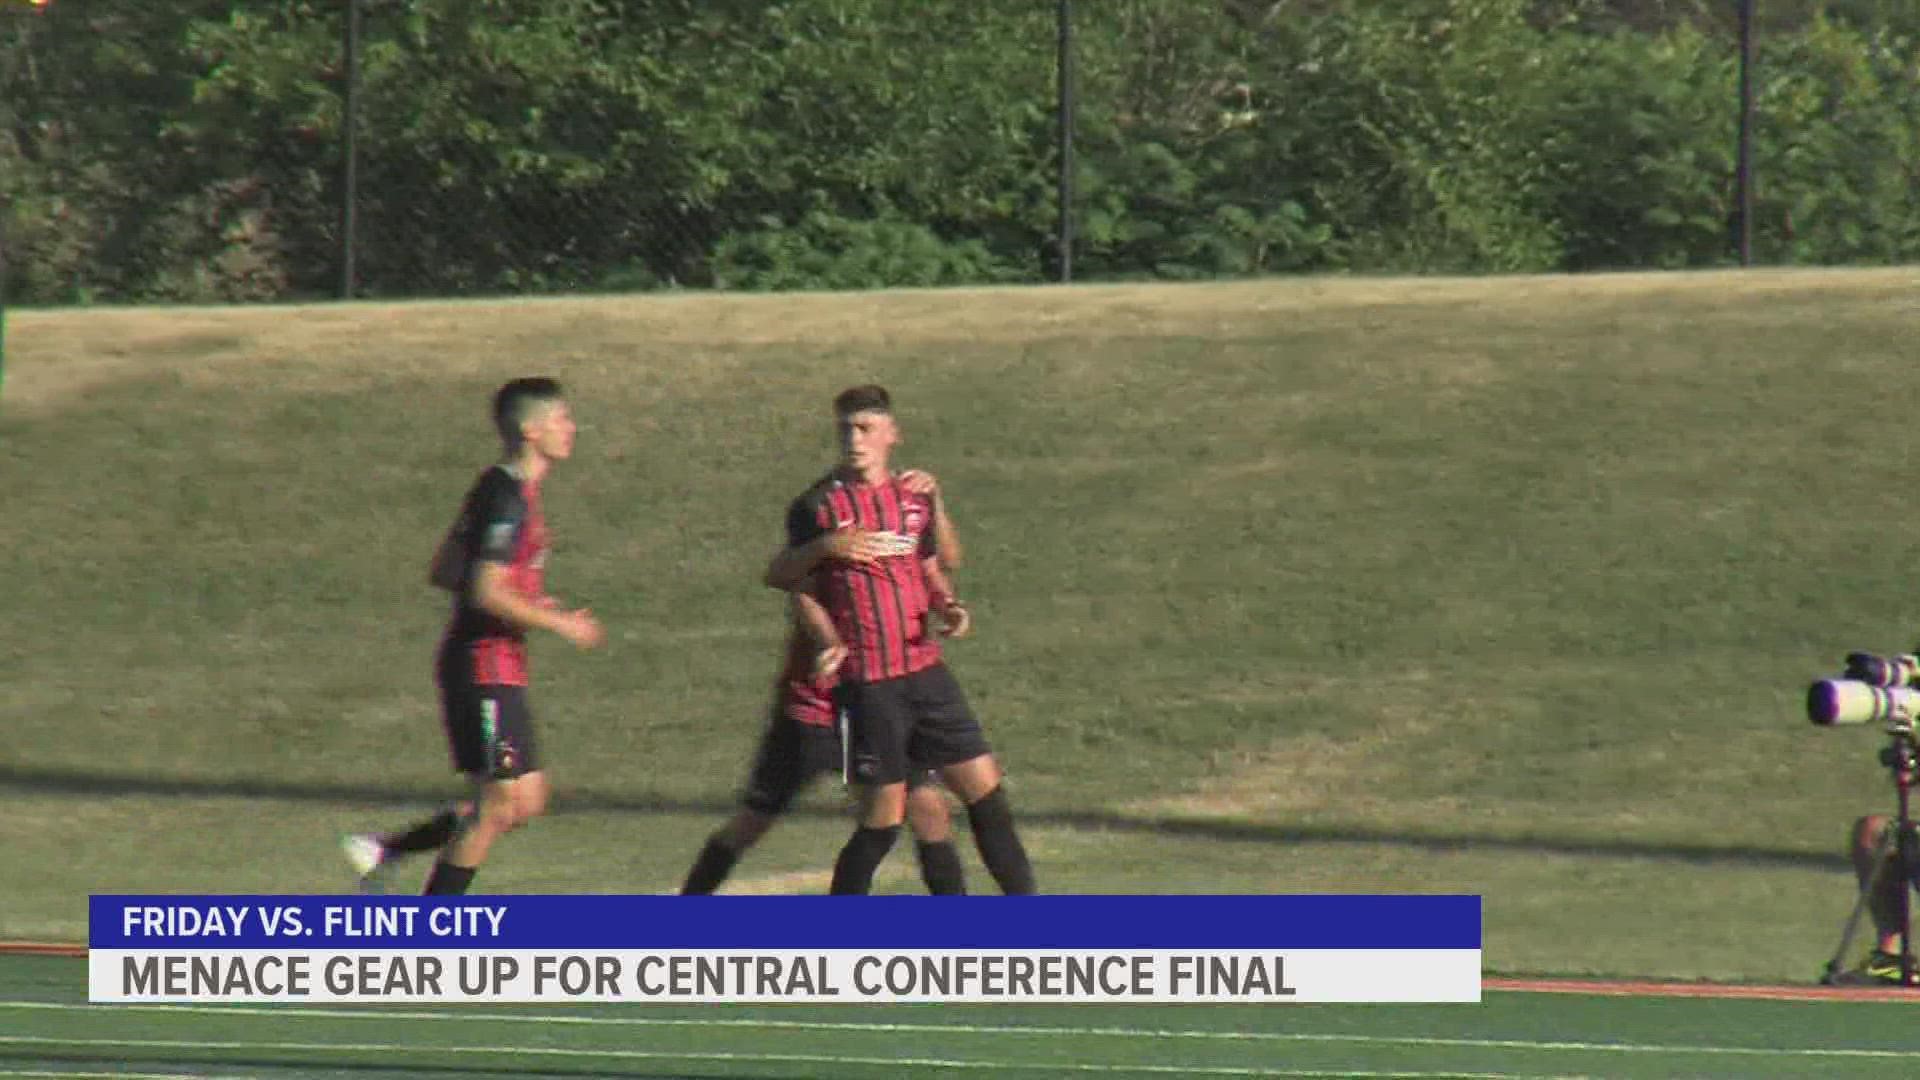 The Des Moines menace will be hosting the USL League Two central conference final on Friday
where they'll be up against their longtime rivals the Flint City Bucks.